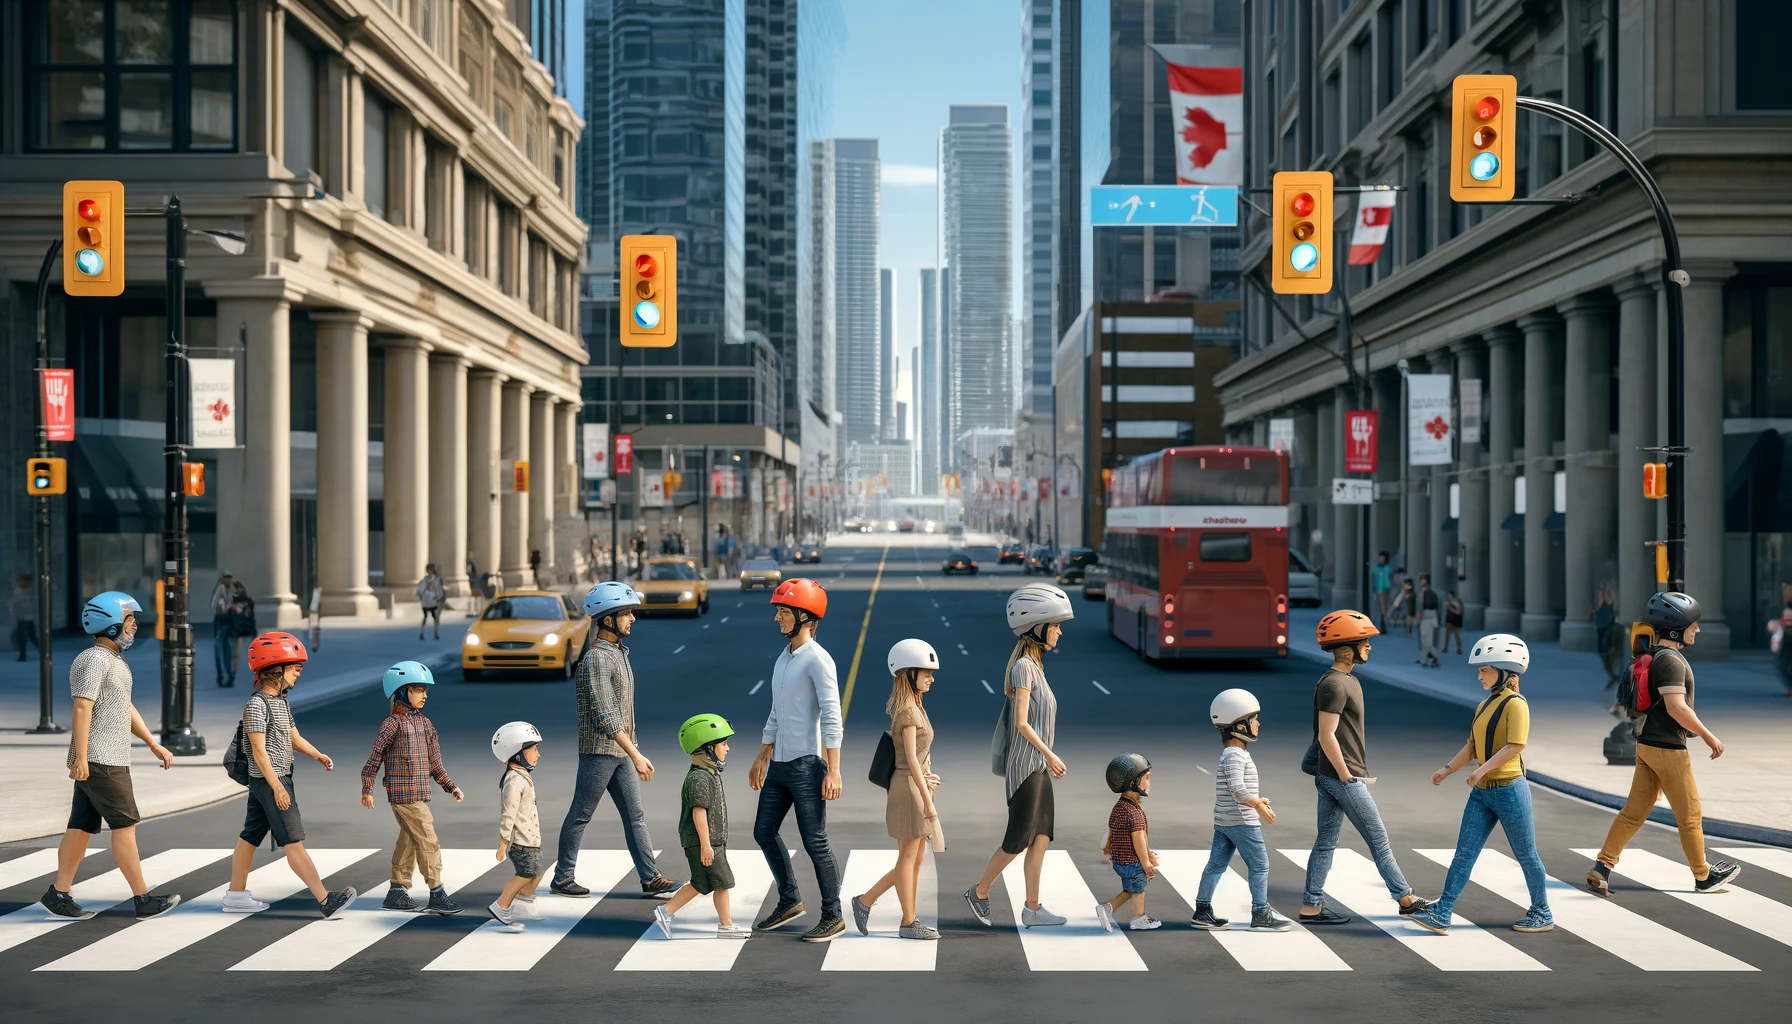 canadian-safety-law-indtroduces-helmets-for-pedestrians-csdn